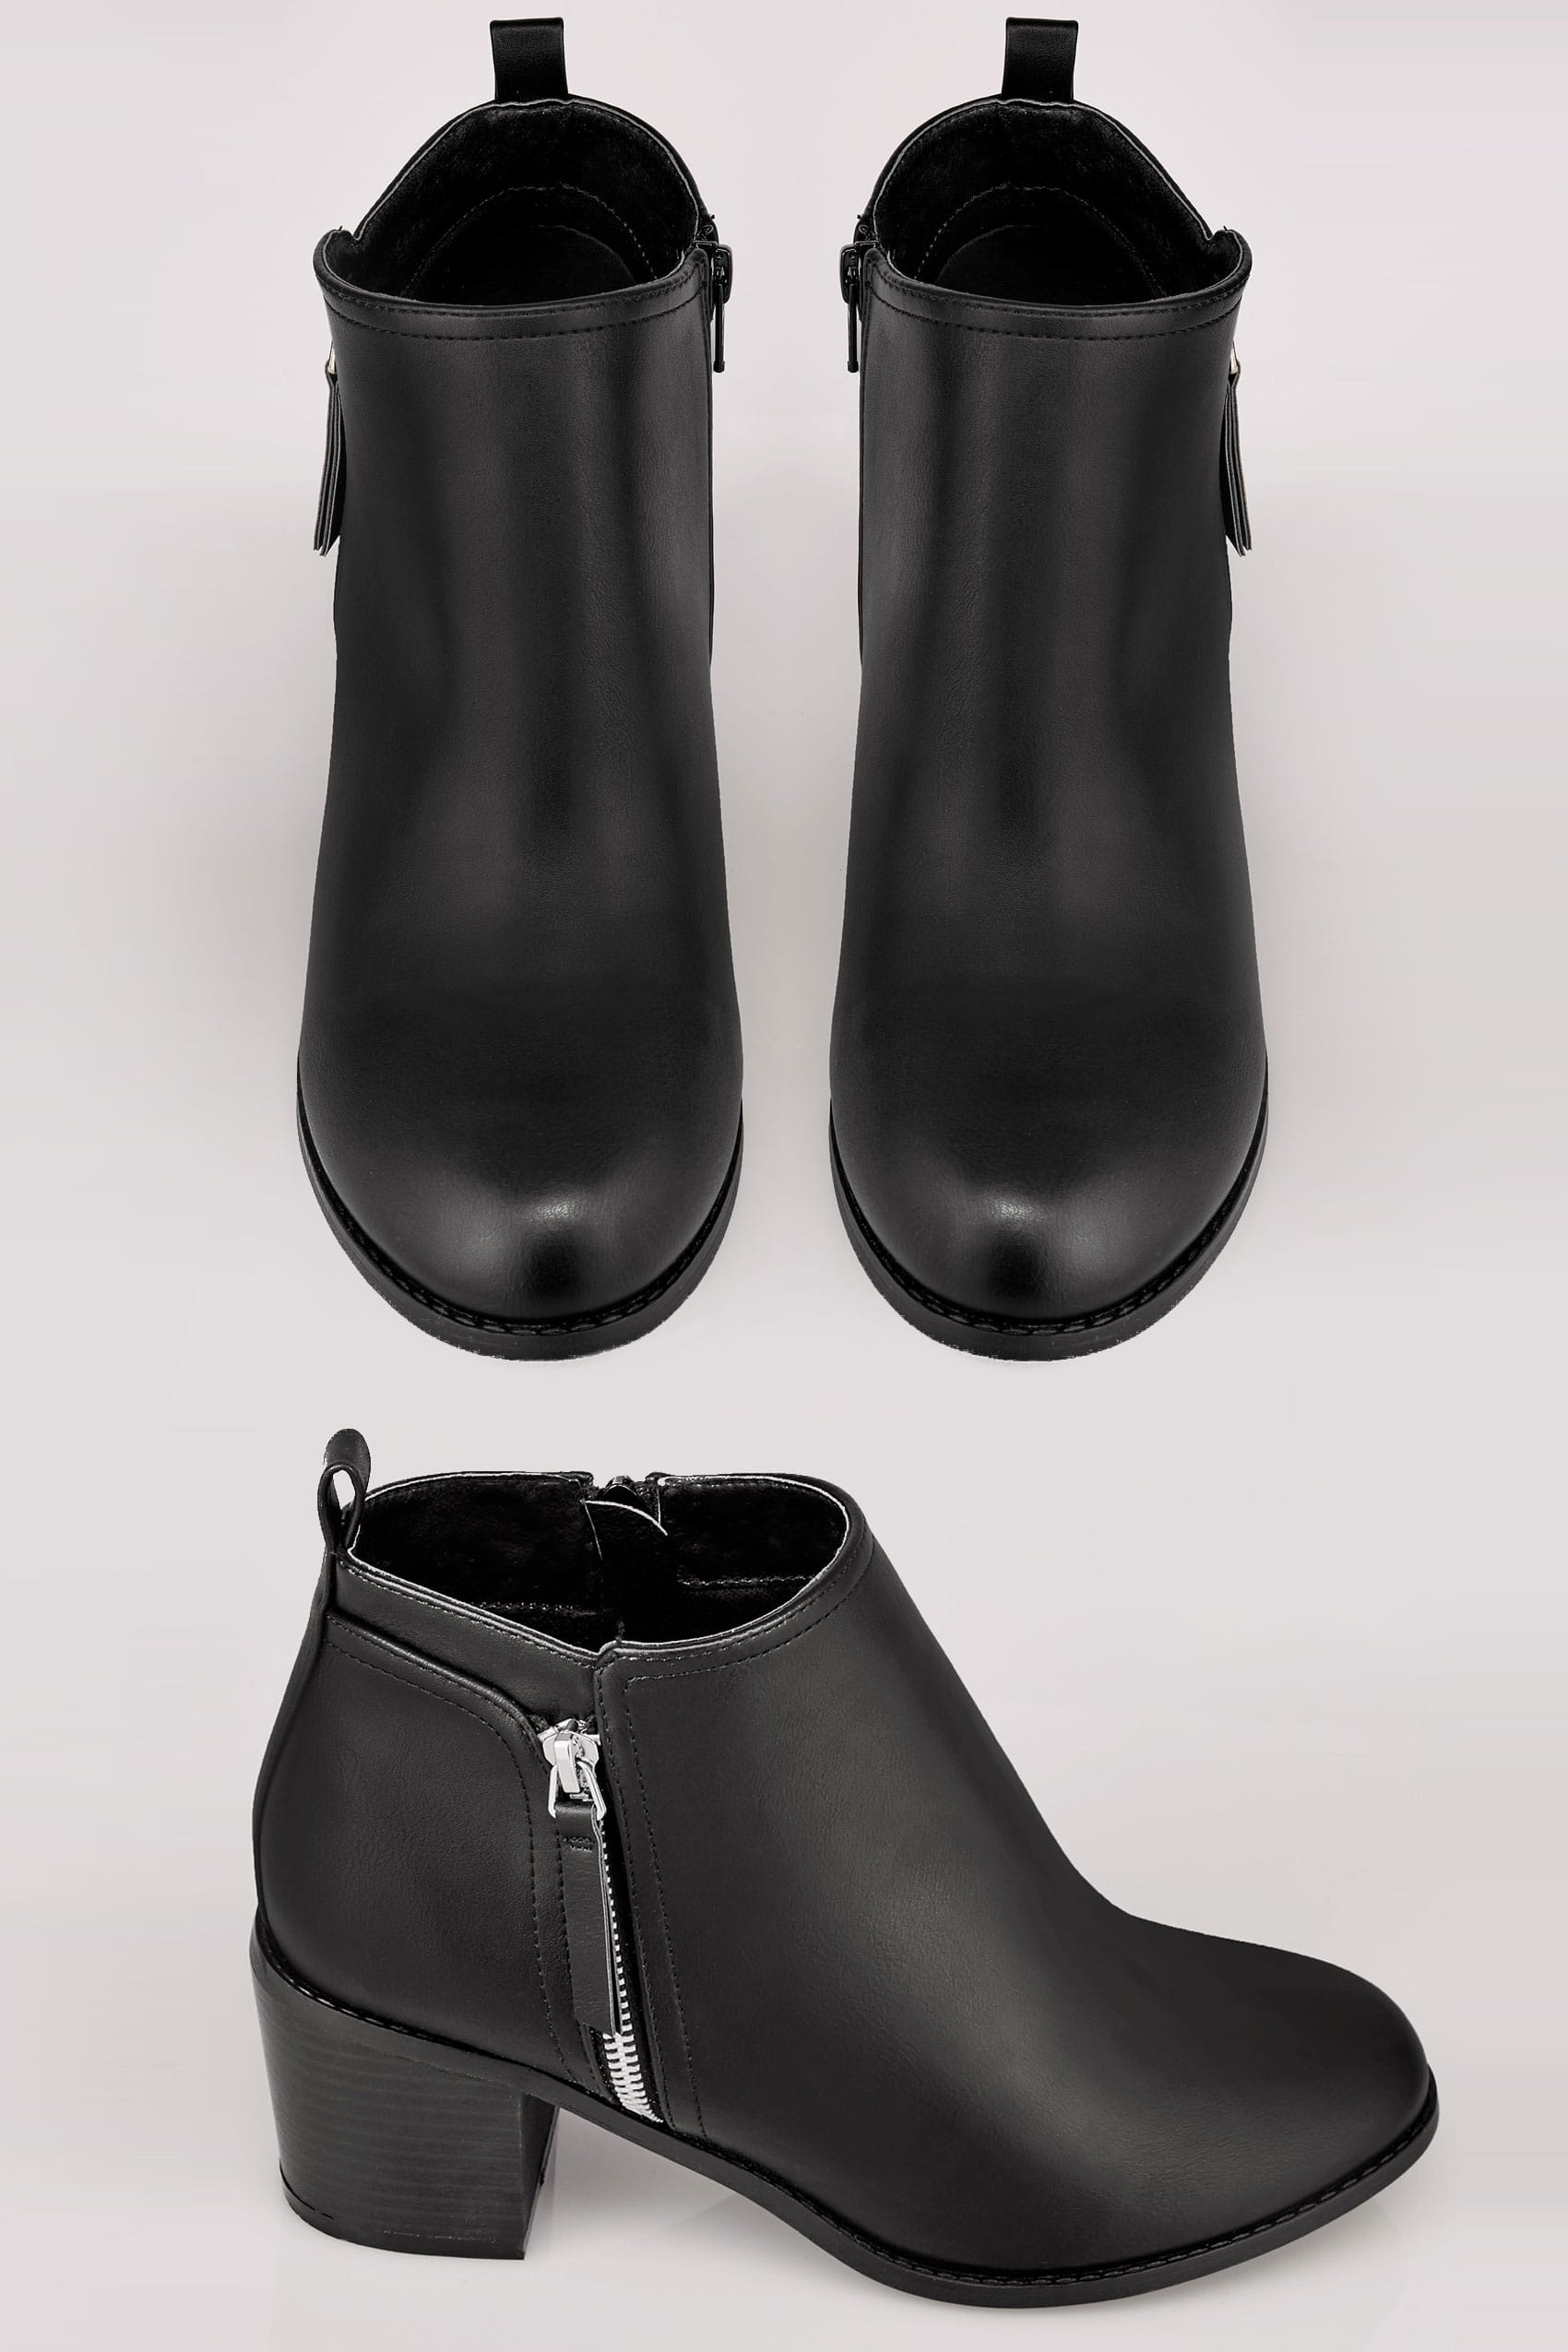 Black Ankle Boots With Block Heel & Side Zips In TRUE EEE Fit, Sizes ...